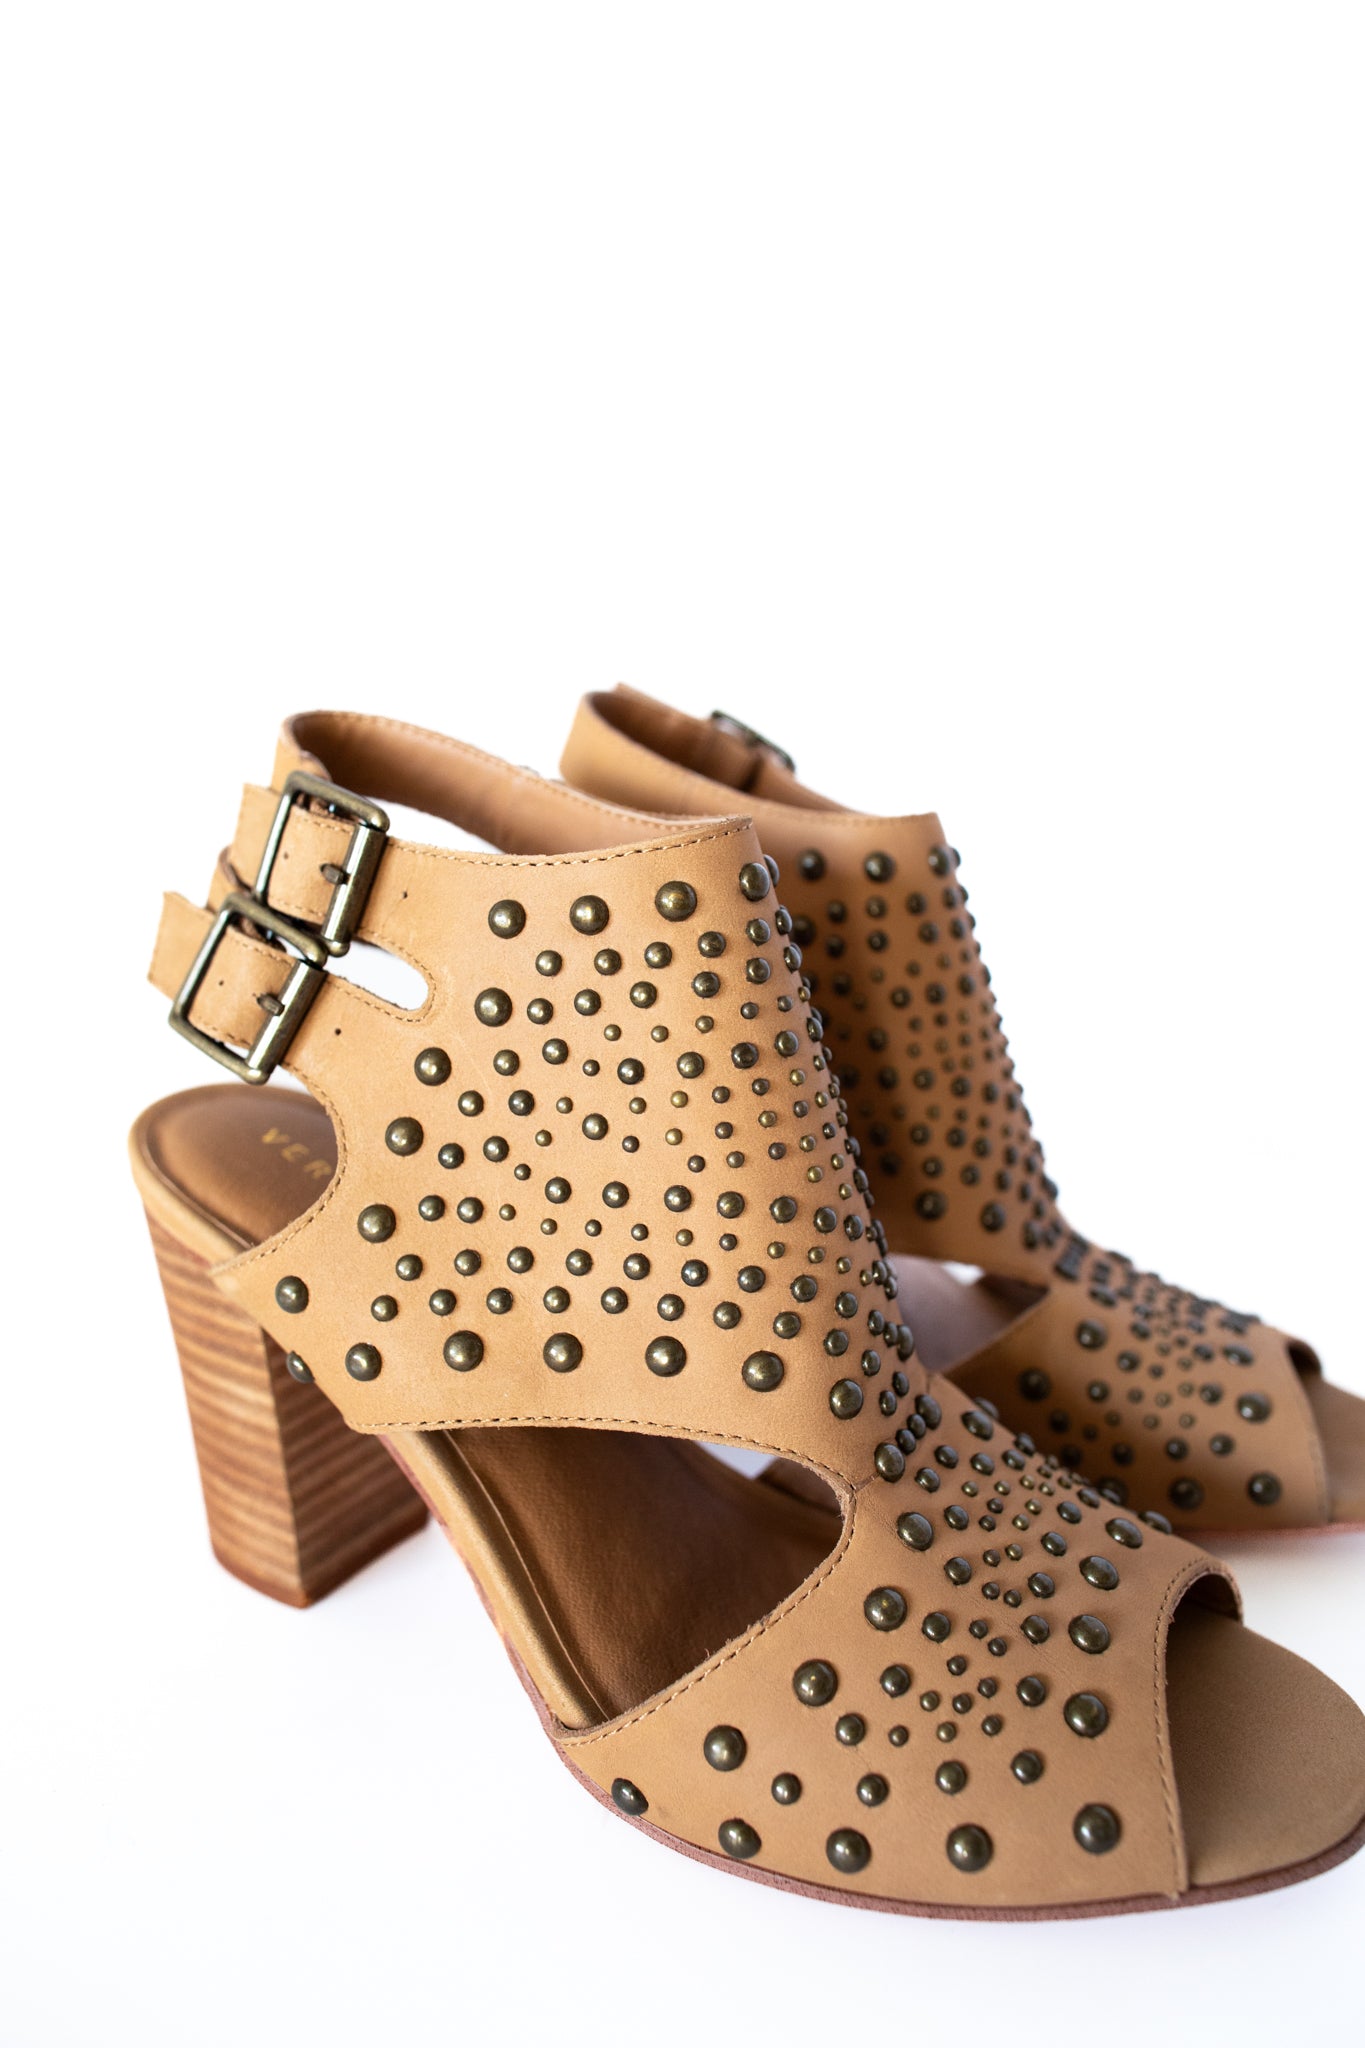 Christina Studded Heeled Sandals in Tan